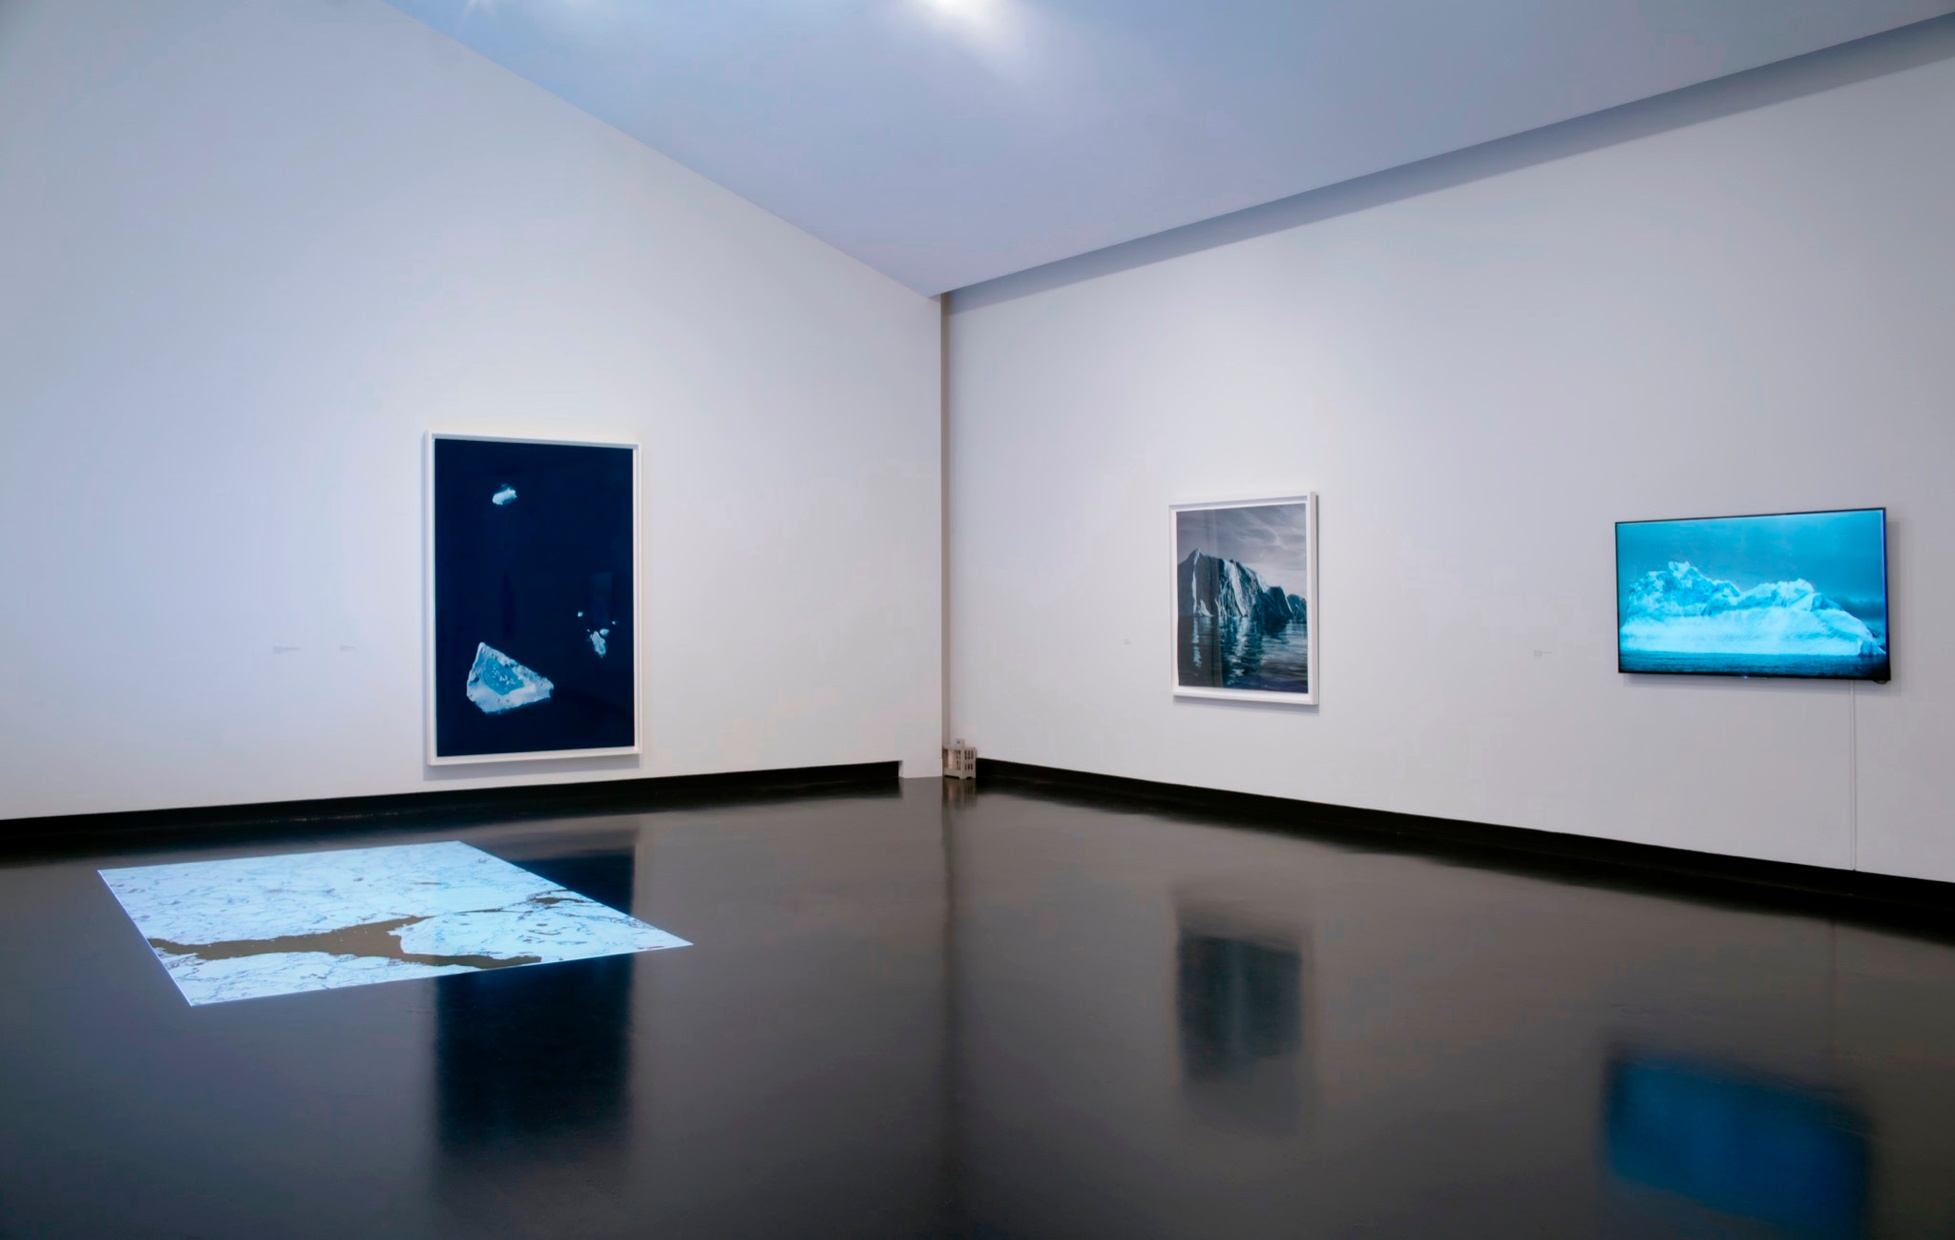 Displayed in a museum gallery with white walls and a black floor are four 2-D artworks featuring dark blue, light blue, and white.